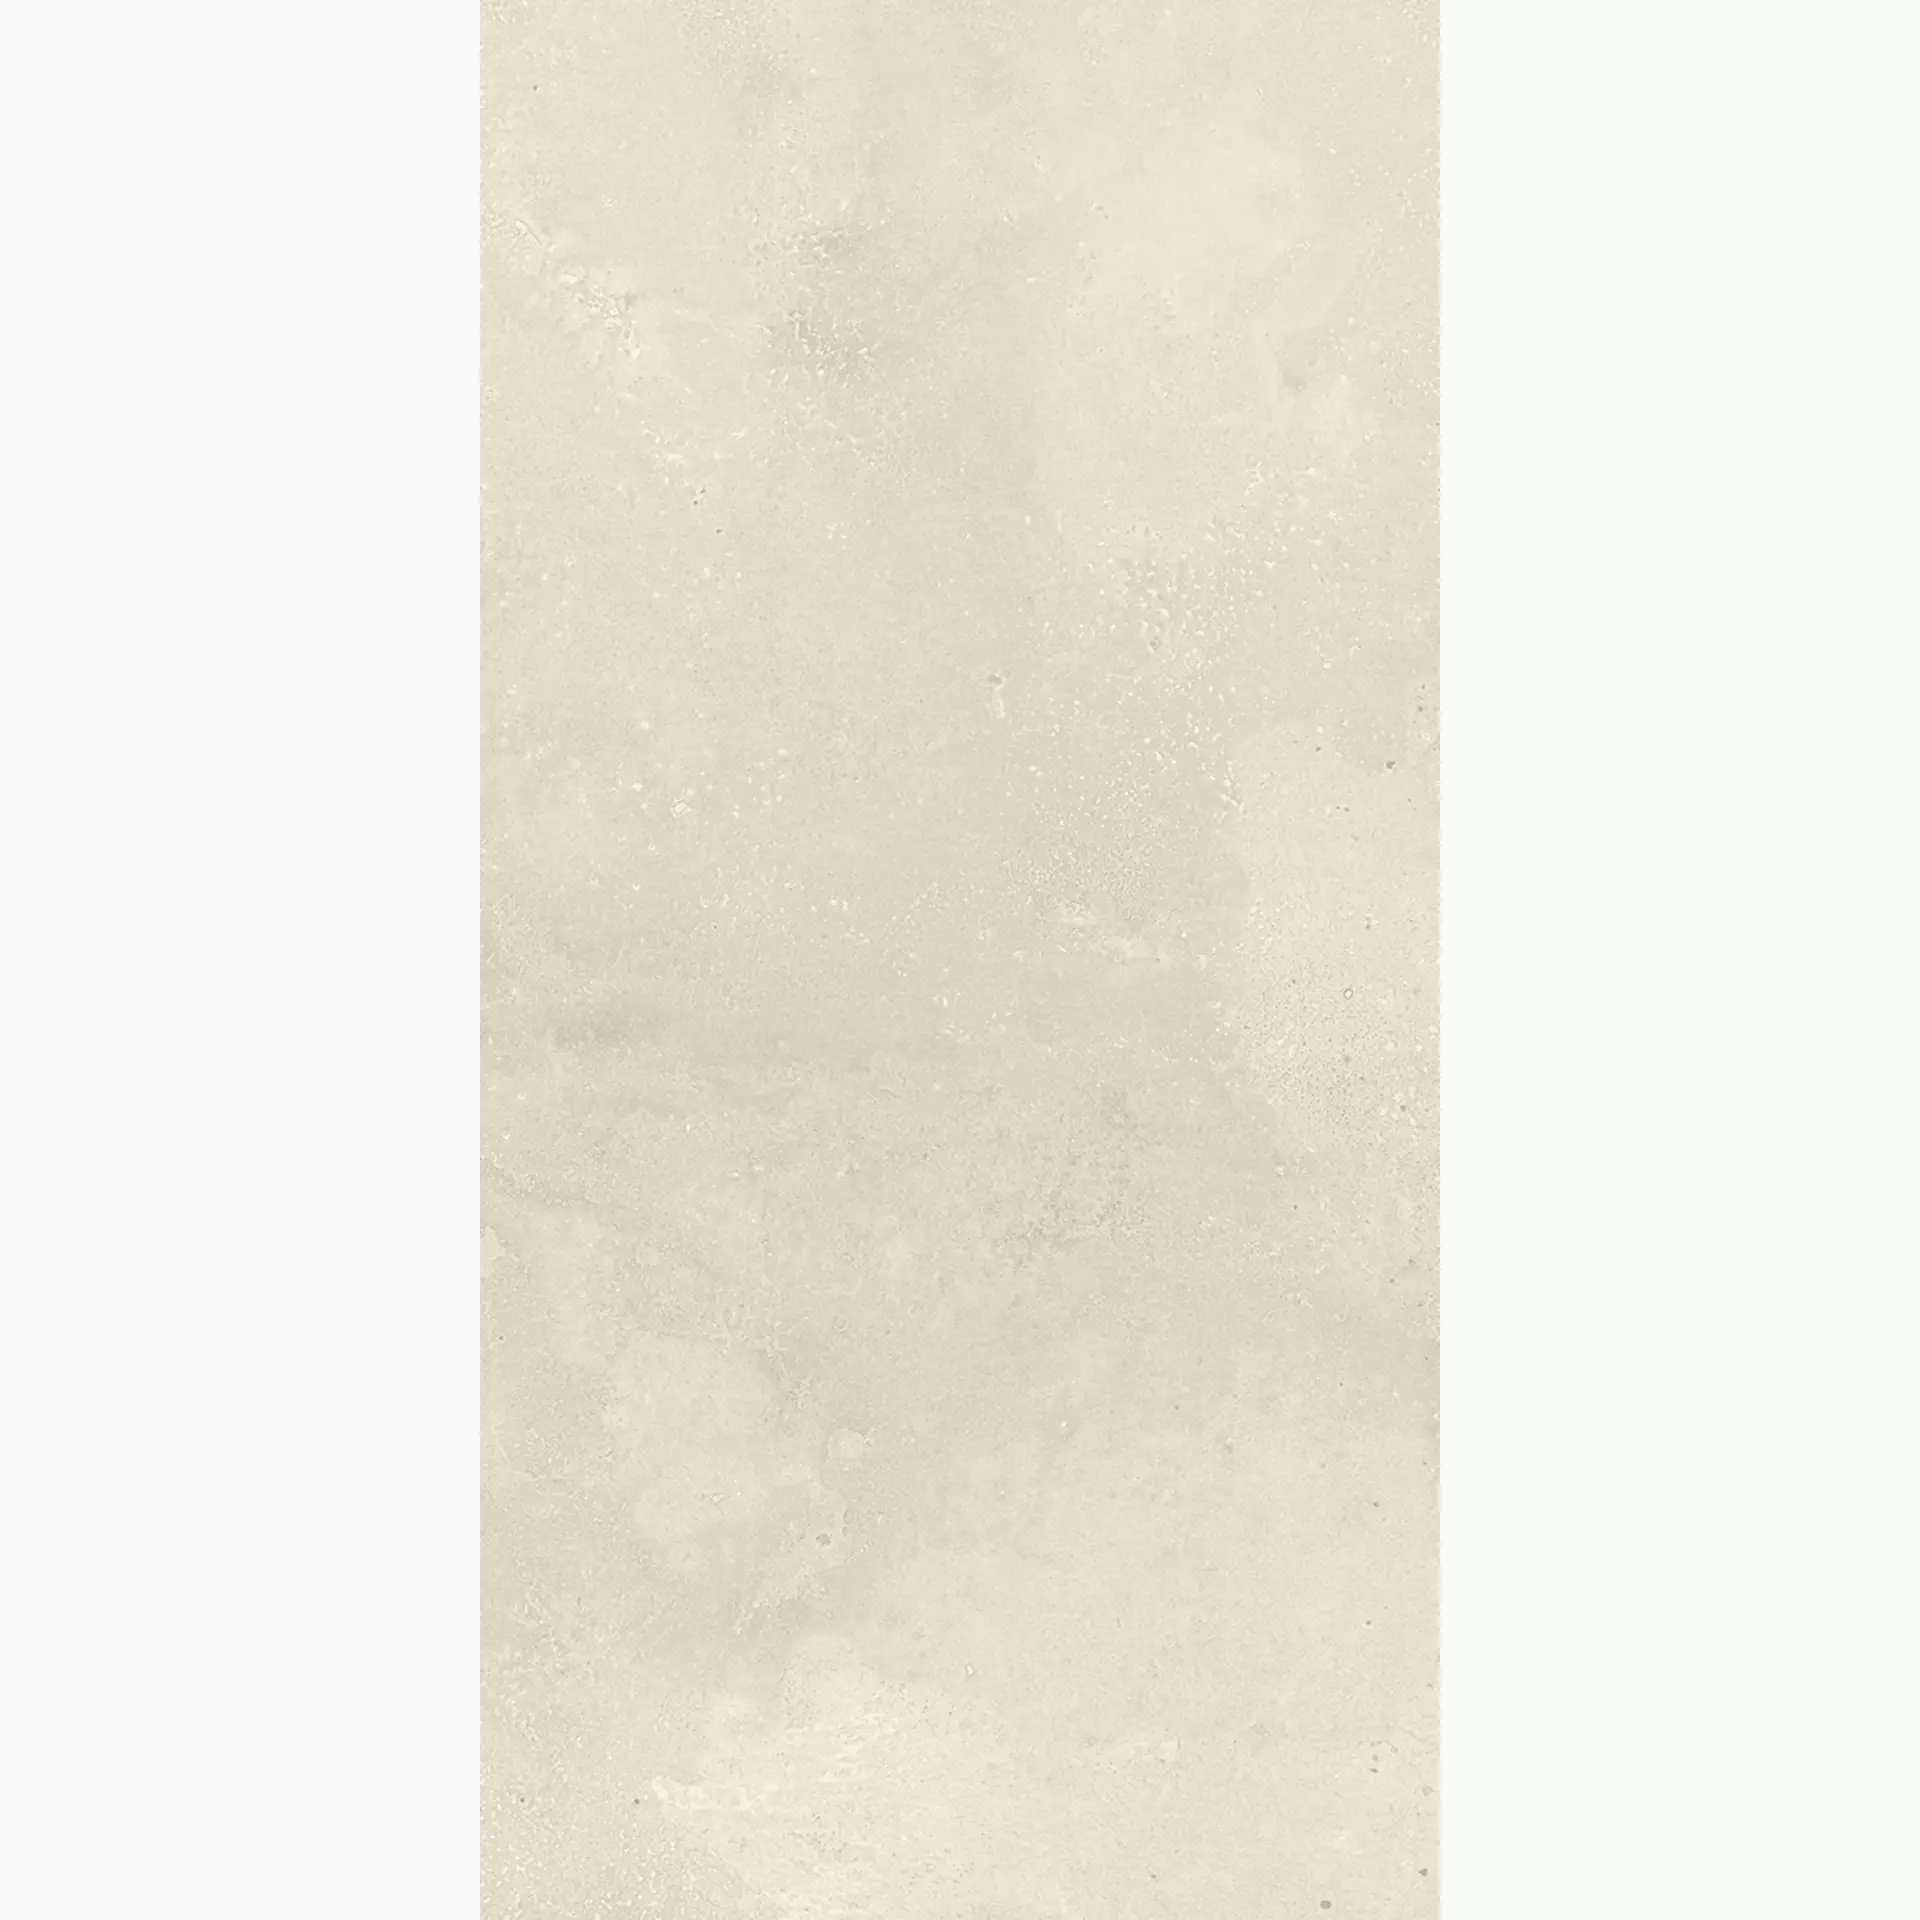 Fondovalle Pigmento Gesso Natural PGM210 40x80cm rectified 8,5mm